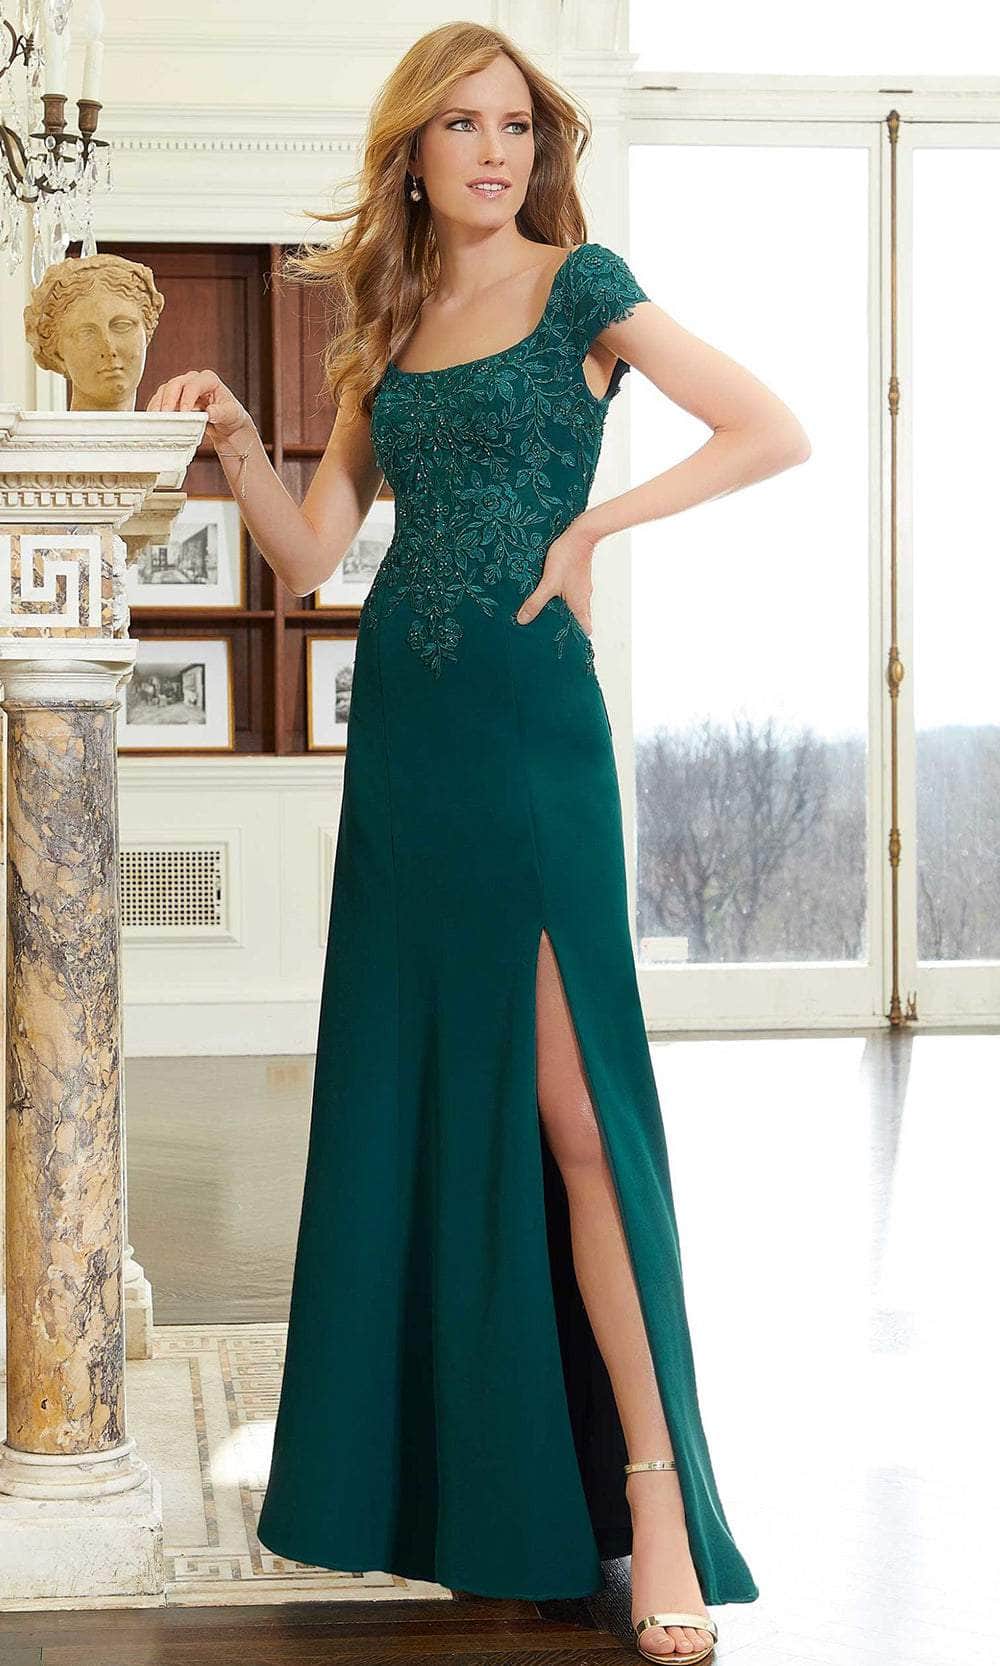 Image of Mori Lee 72608 - Embellished Bodice Cap Sleeve Evening Gown